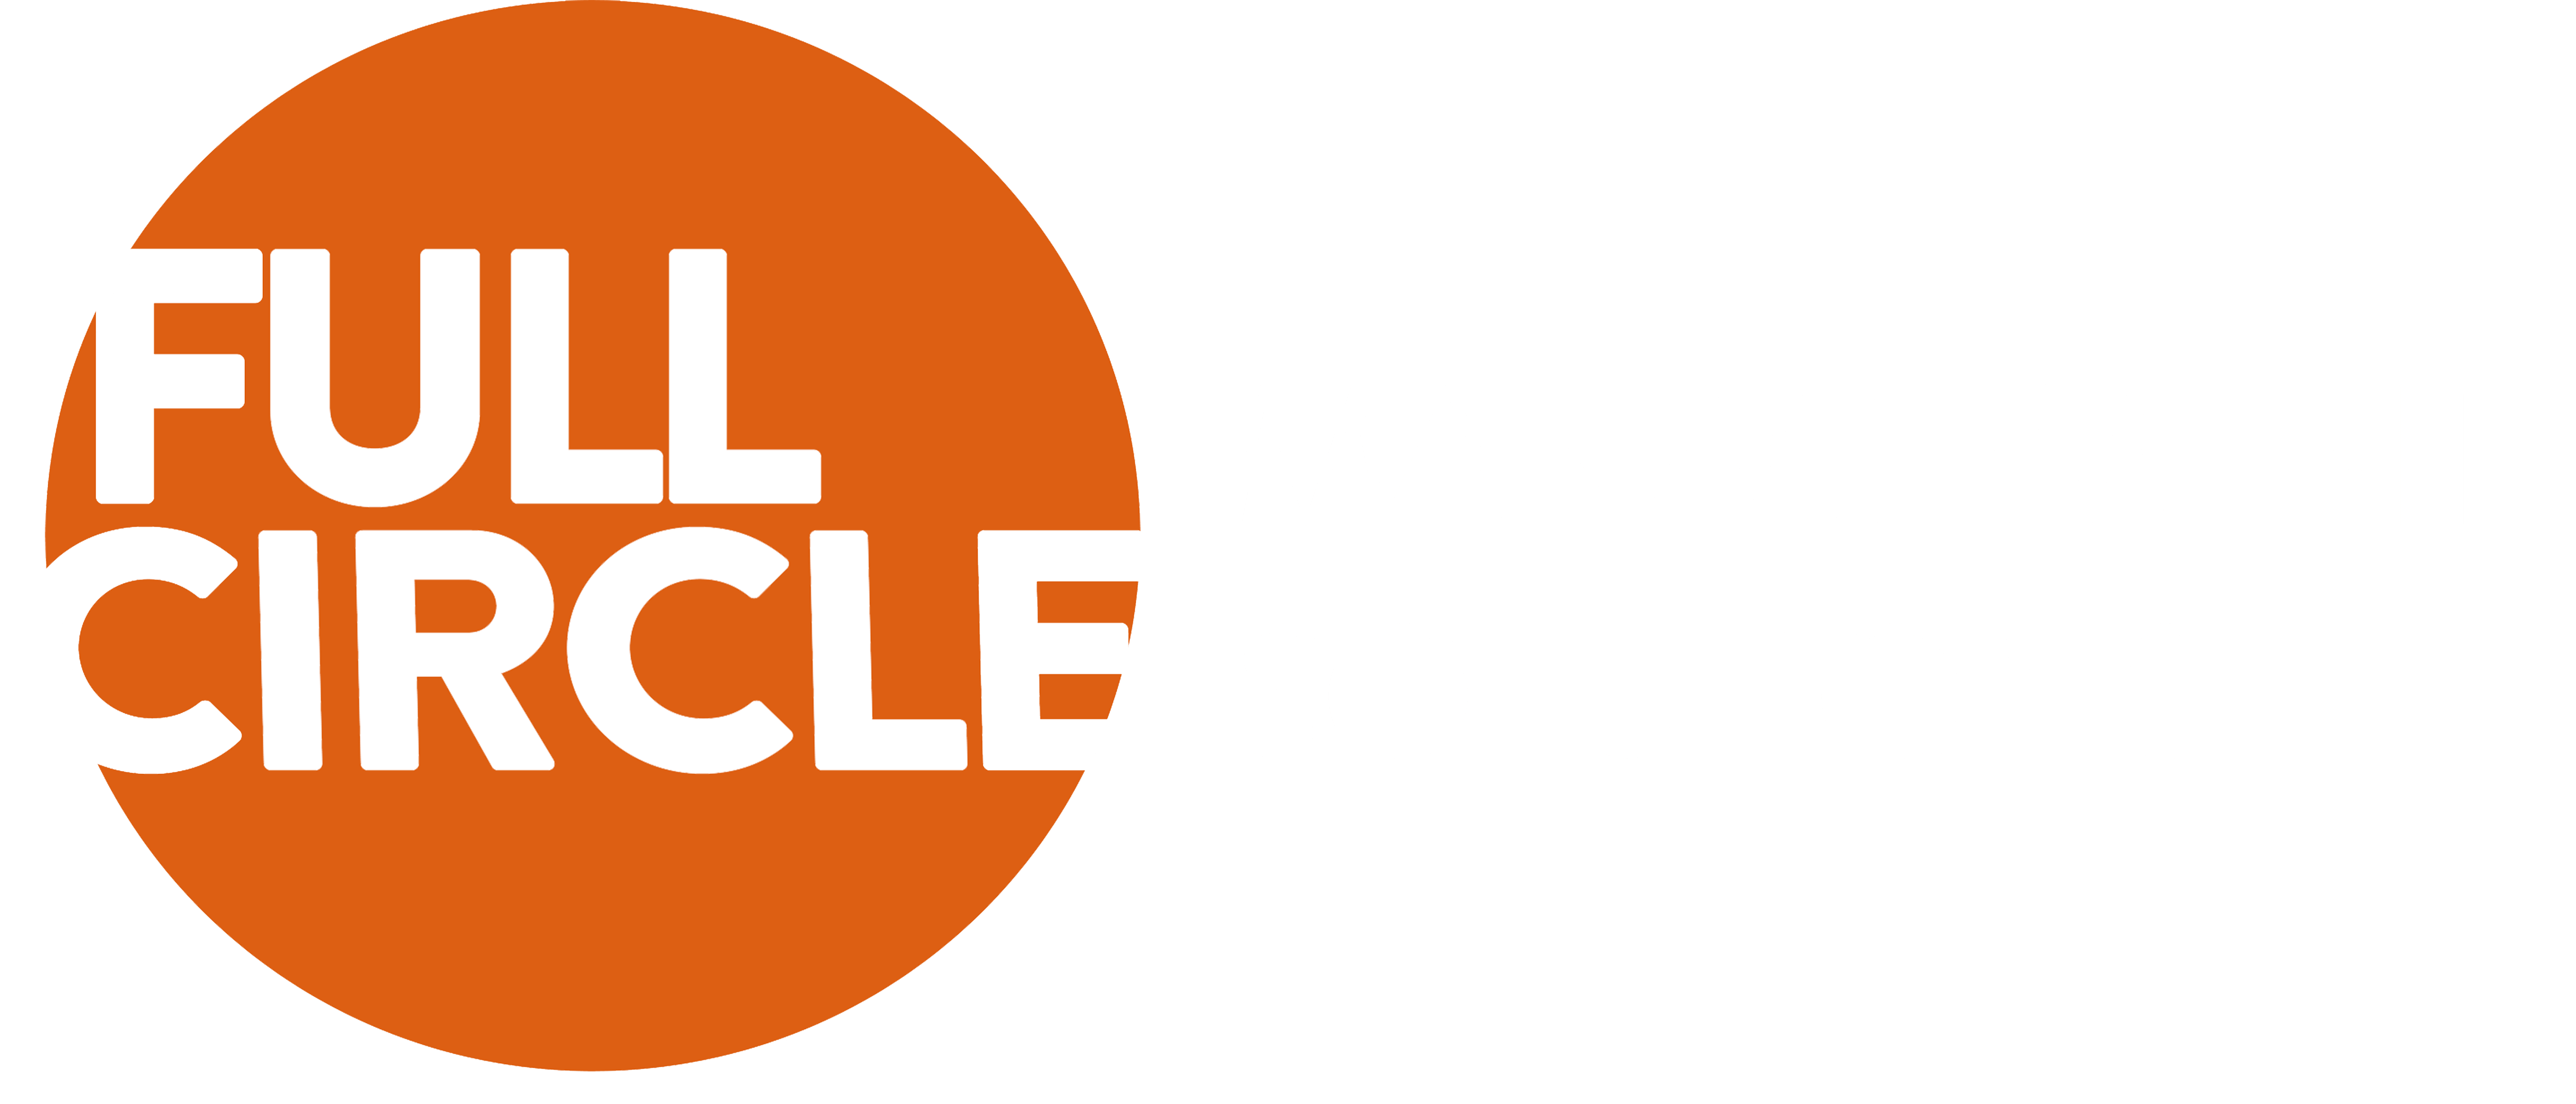 Full Circle Logo - Full Circle Management Solutions ¦ Business Consultancy ¦ Talent